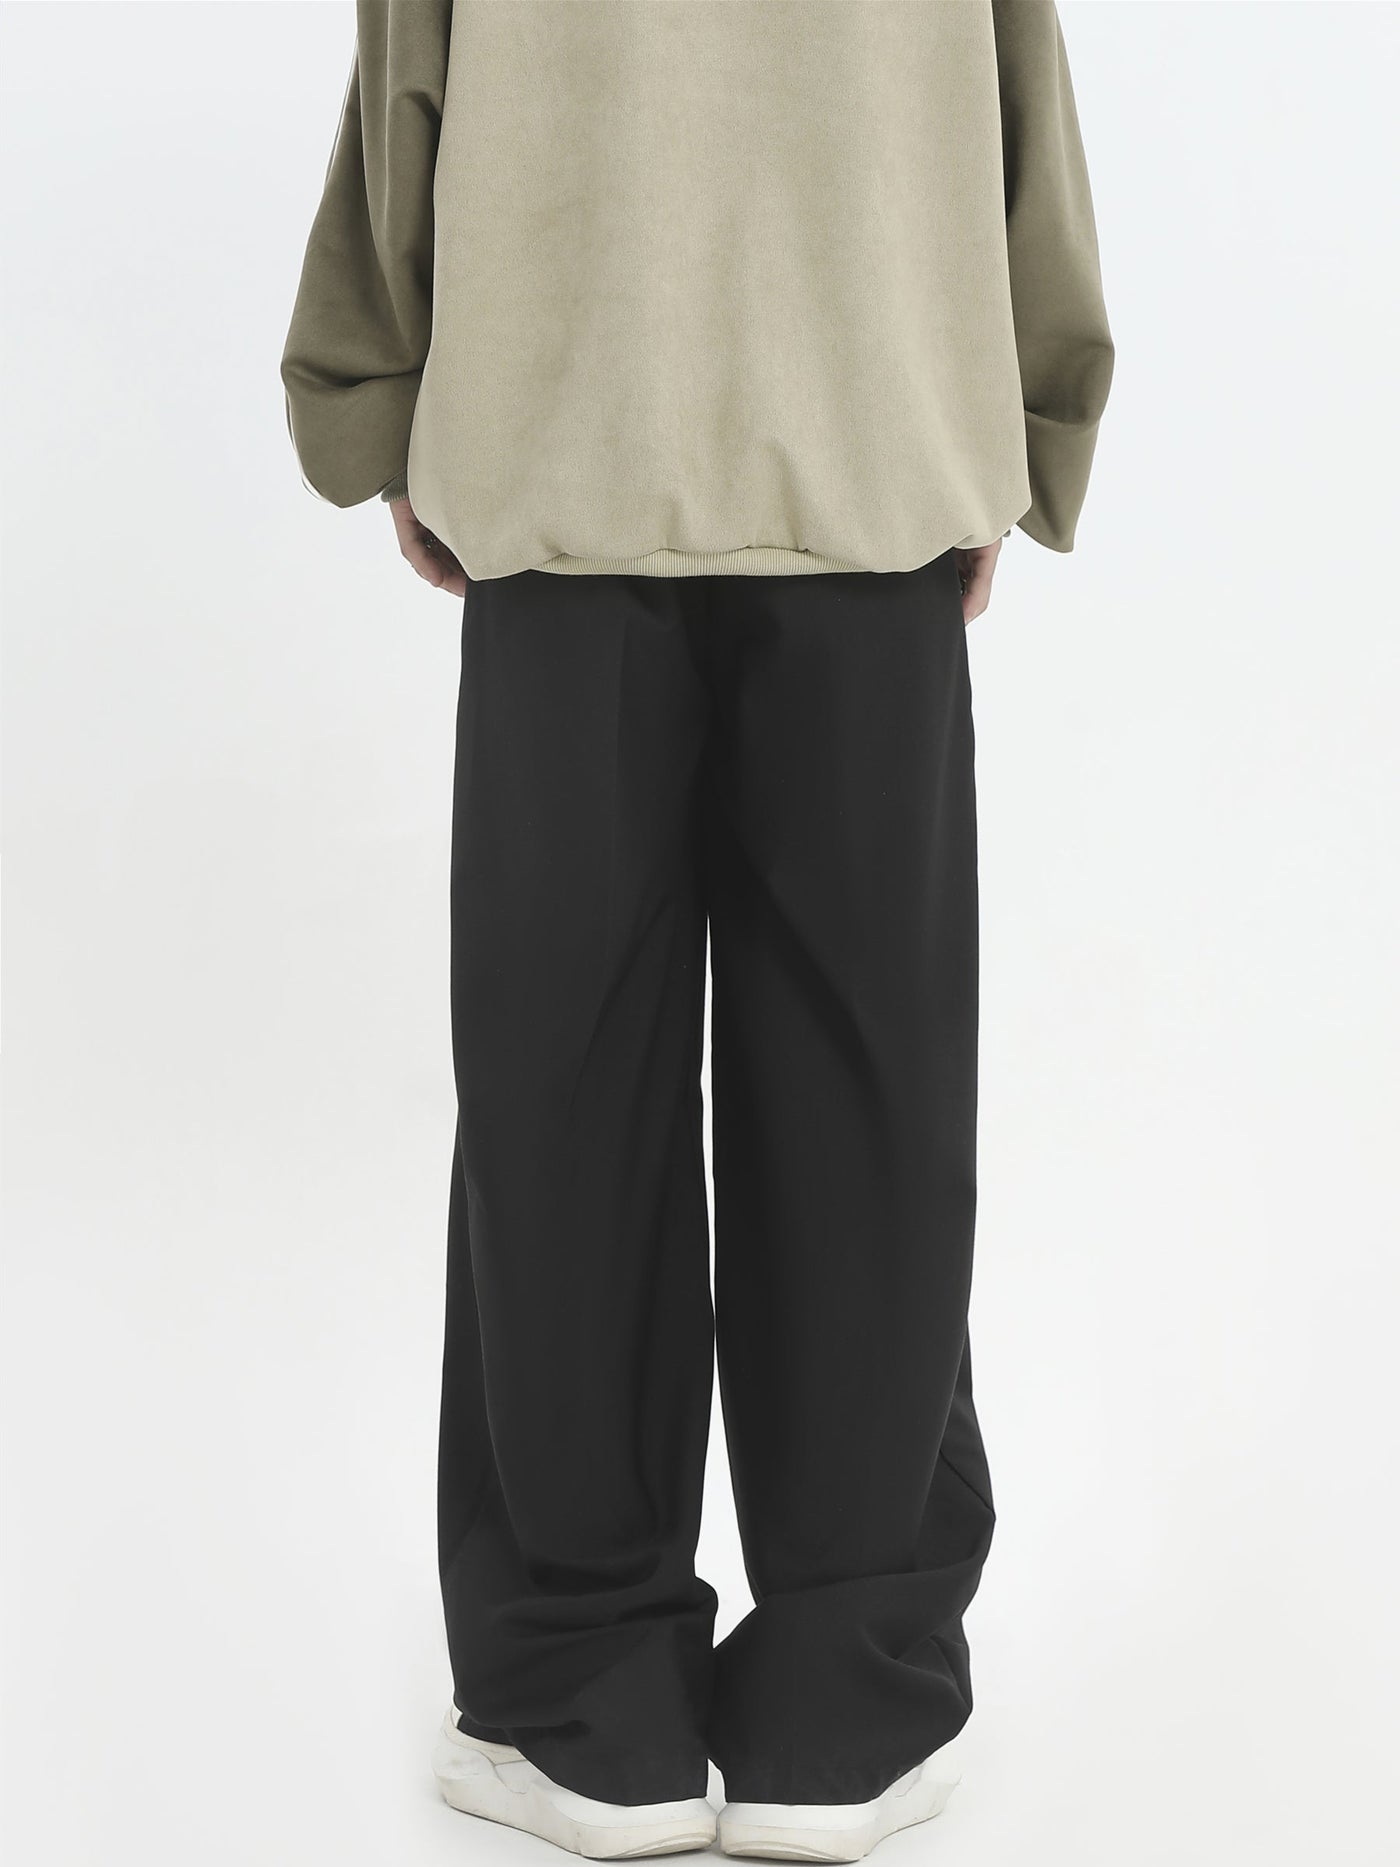 INS Korea Fold Pleated Loose Trousers Korean Street Fashion Pants By INS Korea Shop Online at OH Vault